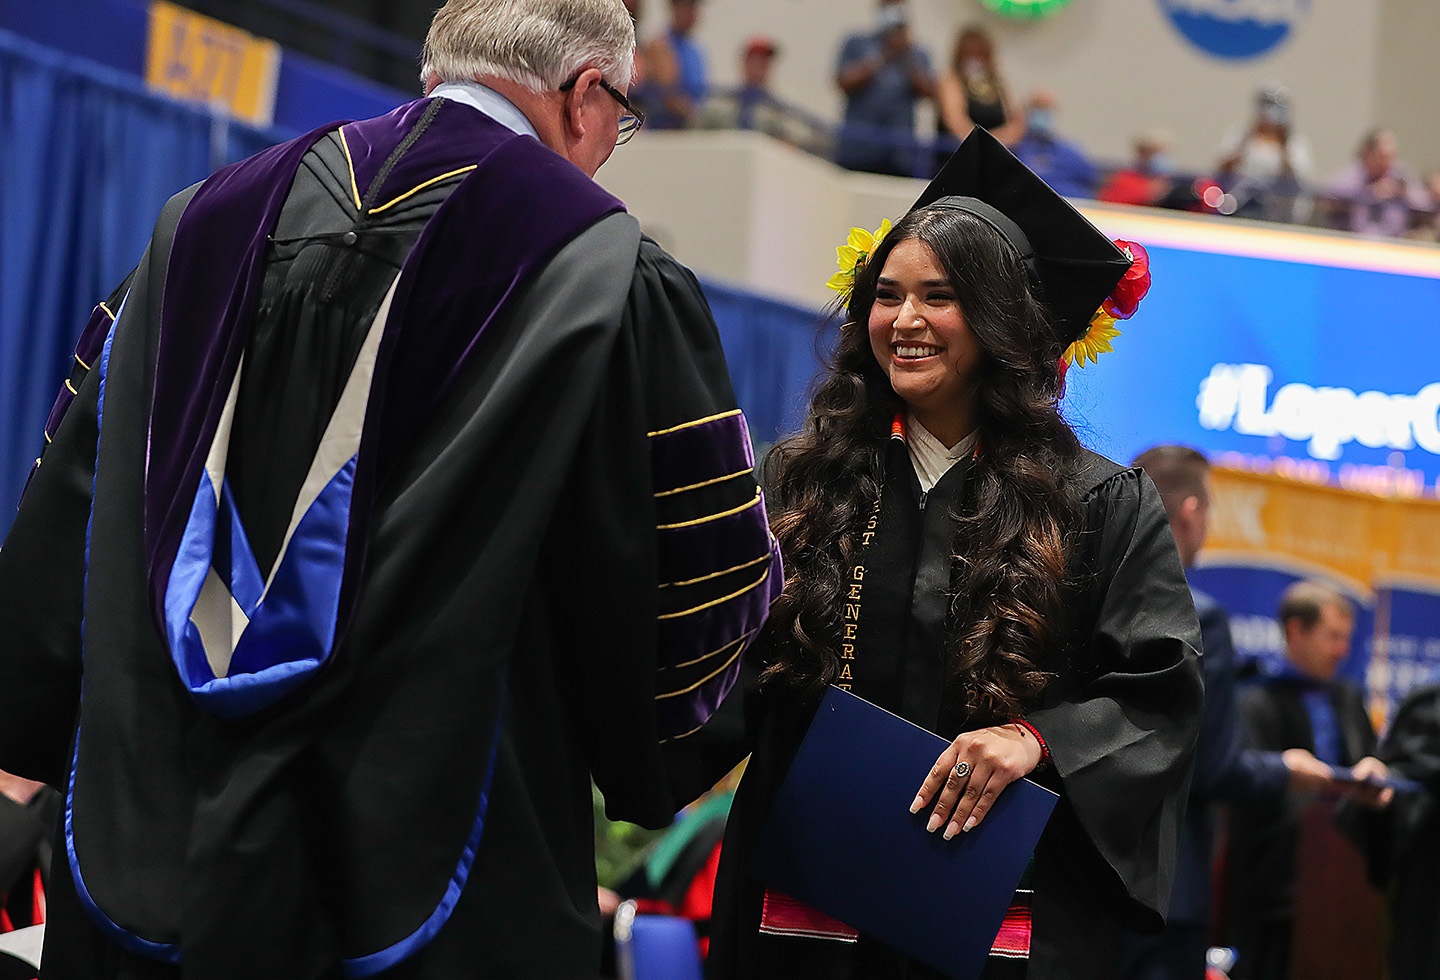 UNK Chancellor Doug Kristensen congratulates graduate Guadalupe Maravilla of Lexington during Friday’s spring commencement ceremony in the Health and Sports Center. Maravilla earned a bachelor’s degree in health sciences.